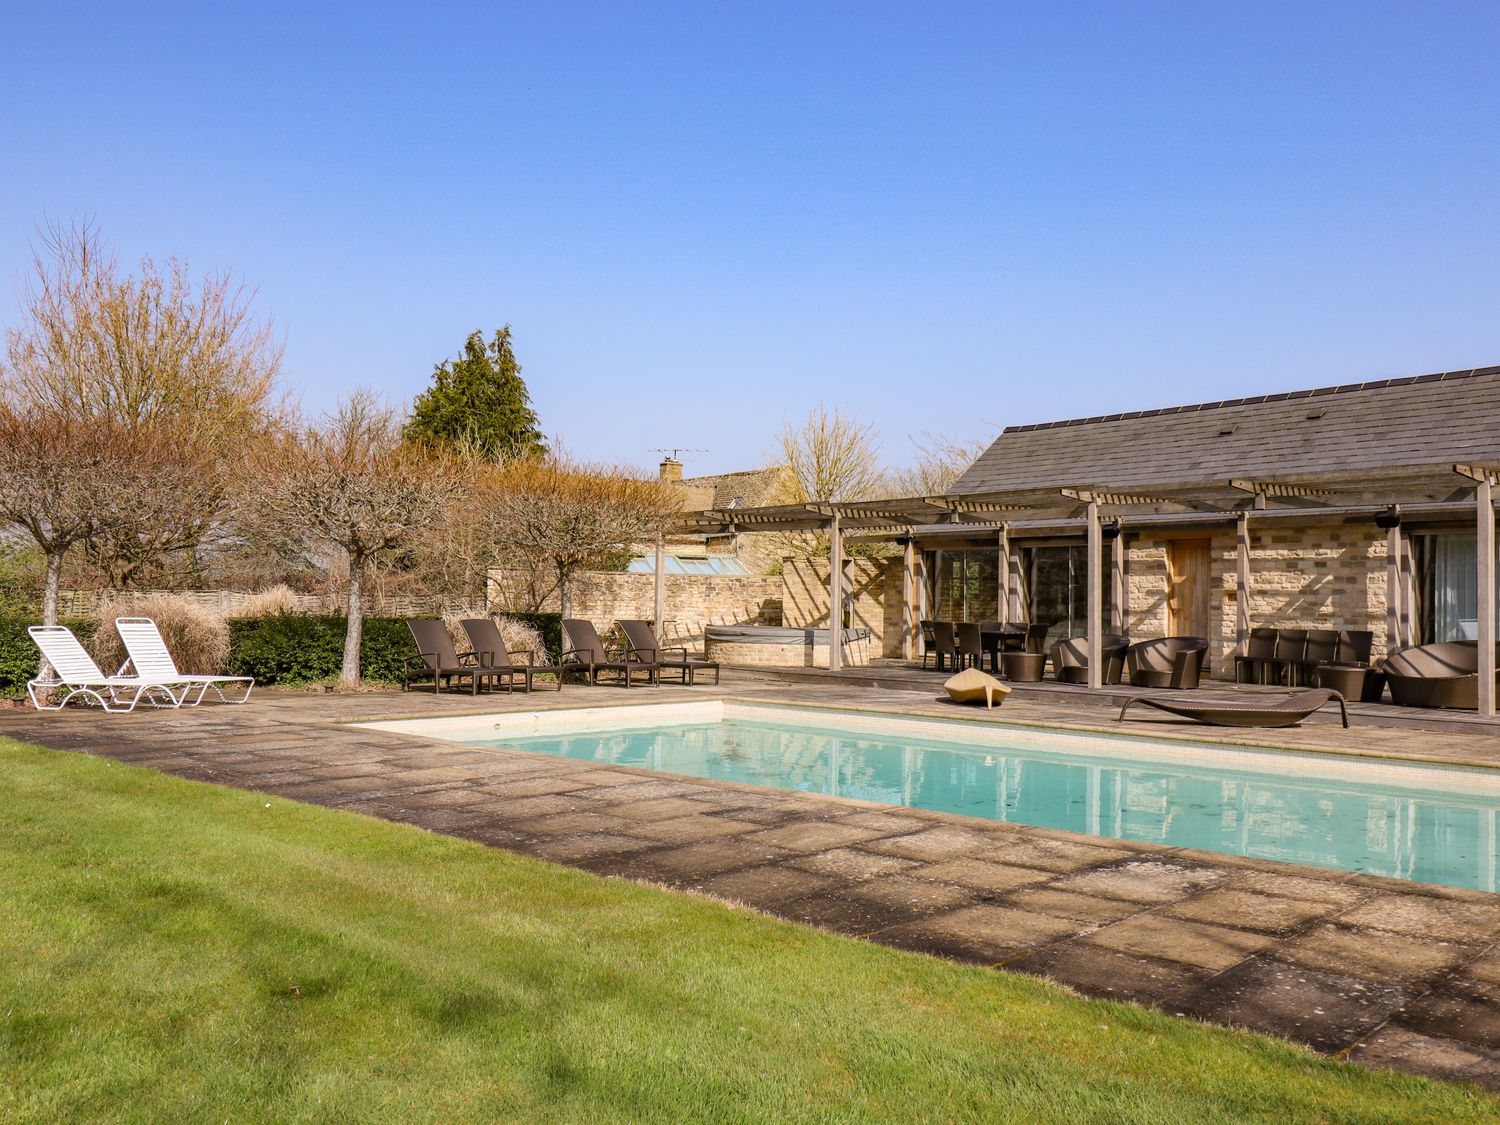 The Tile and Pool House, Lower Slaughter